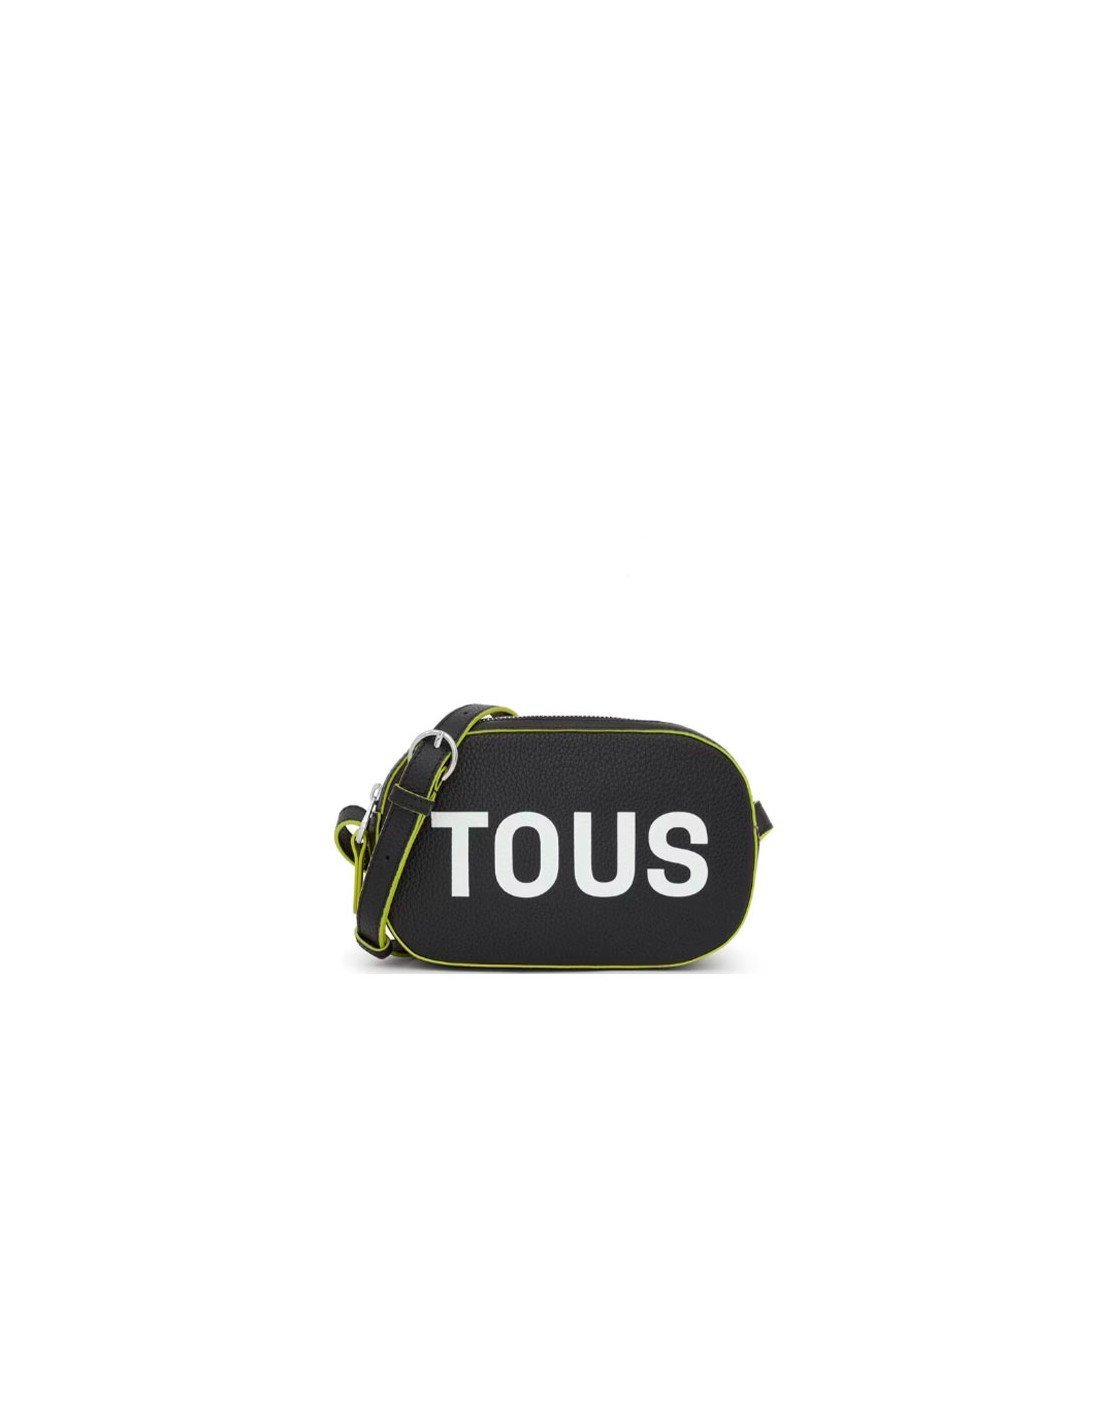 Tous Black and Green Leather Shoulder Bag Lynn